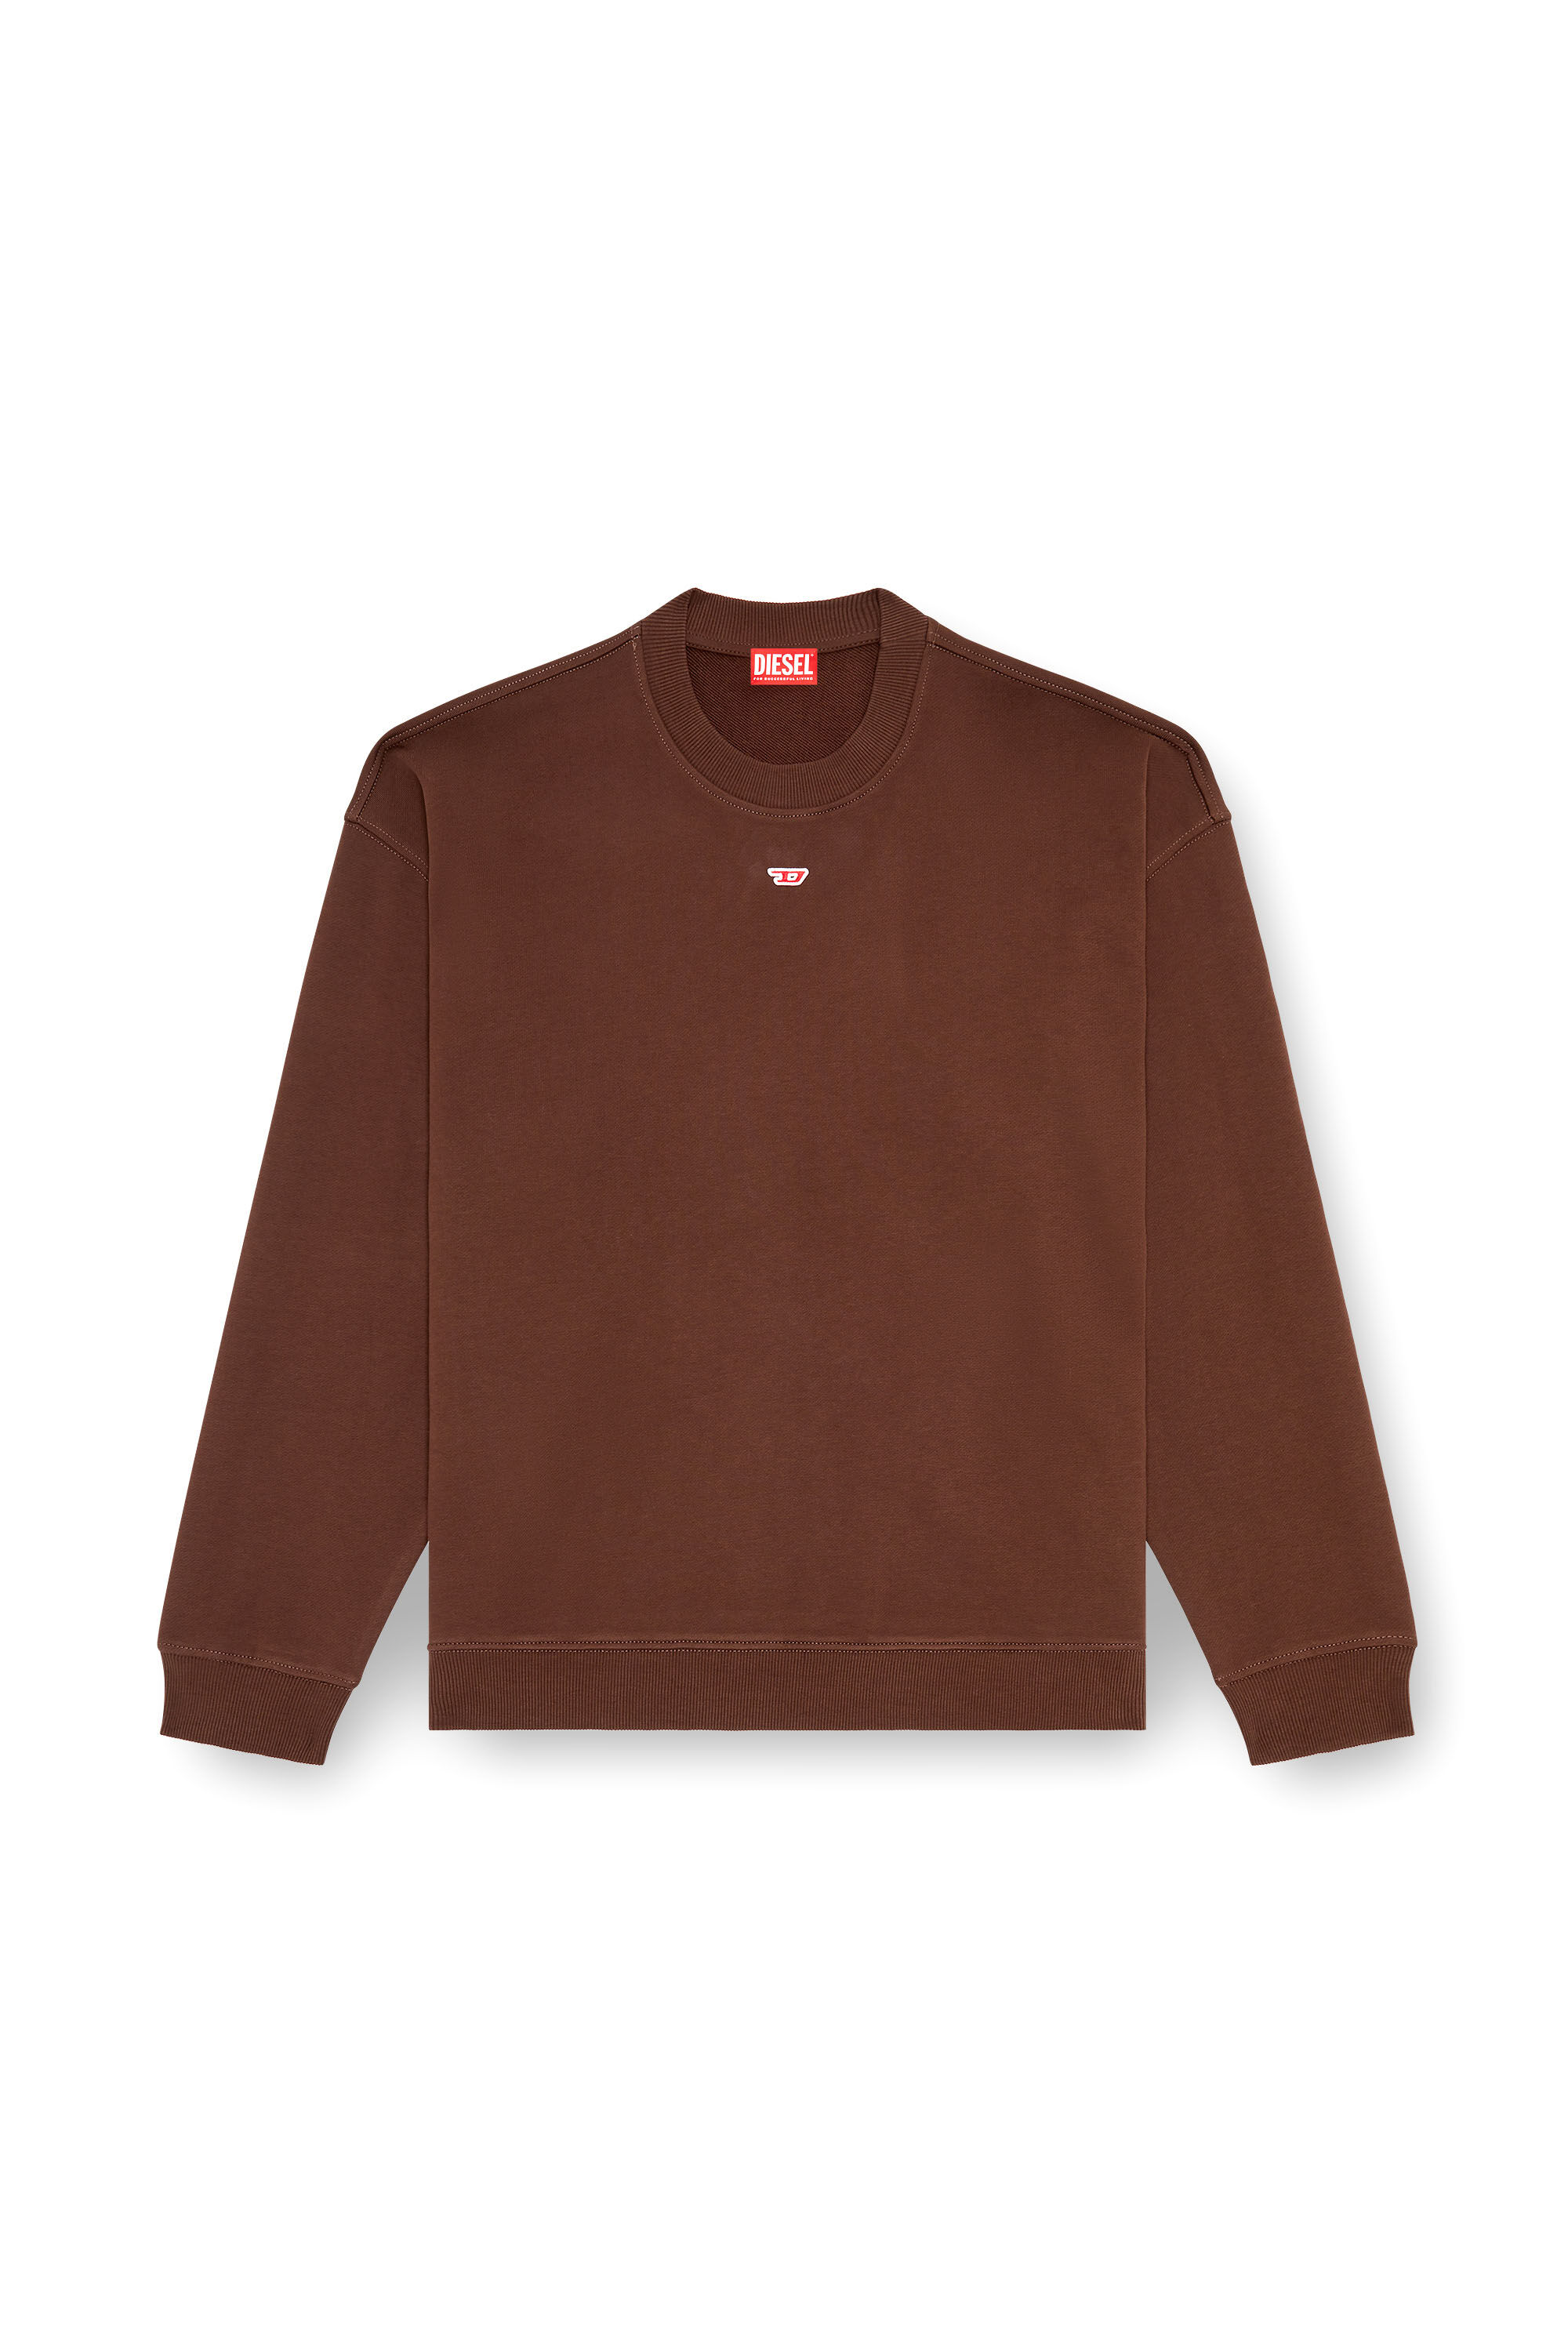 Diesel - S-BOXT-D, Man Sweatshirt with D logo patch in Brown - Image 2